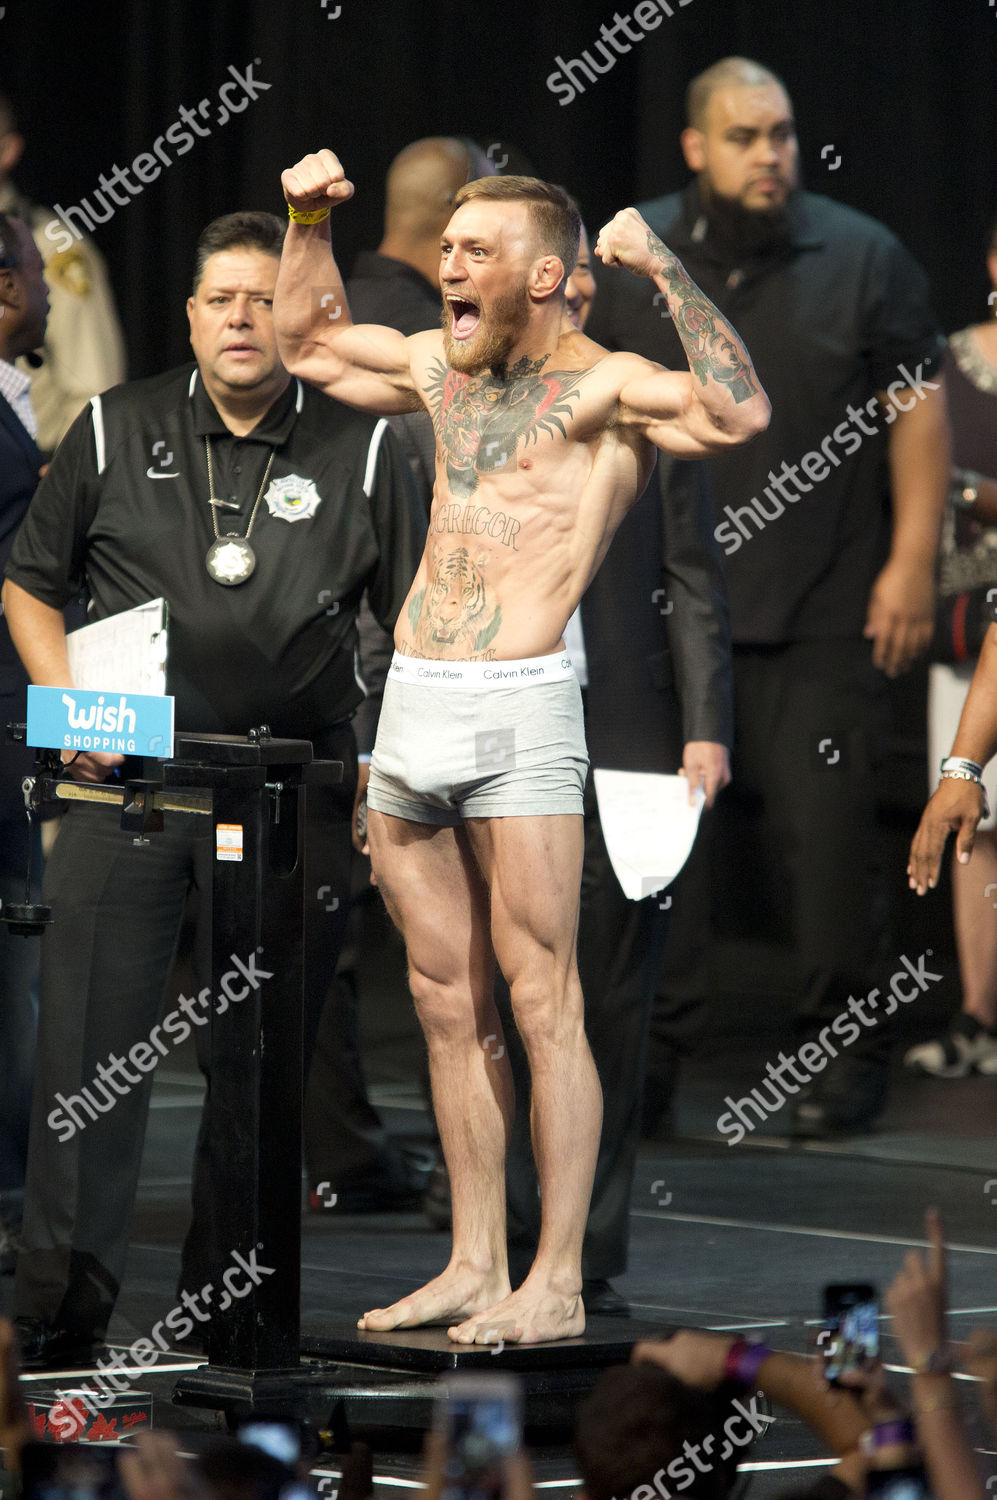 weighing-ceremony-of-conor-mcgregor-and-floyd-mayweather-las-vegas-usa-shutterstock-editorial-9027082b.jpg